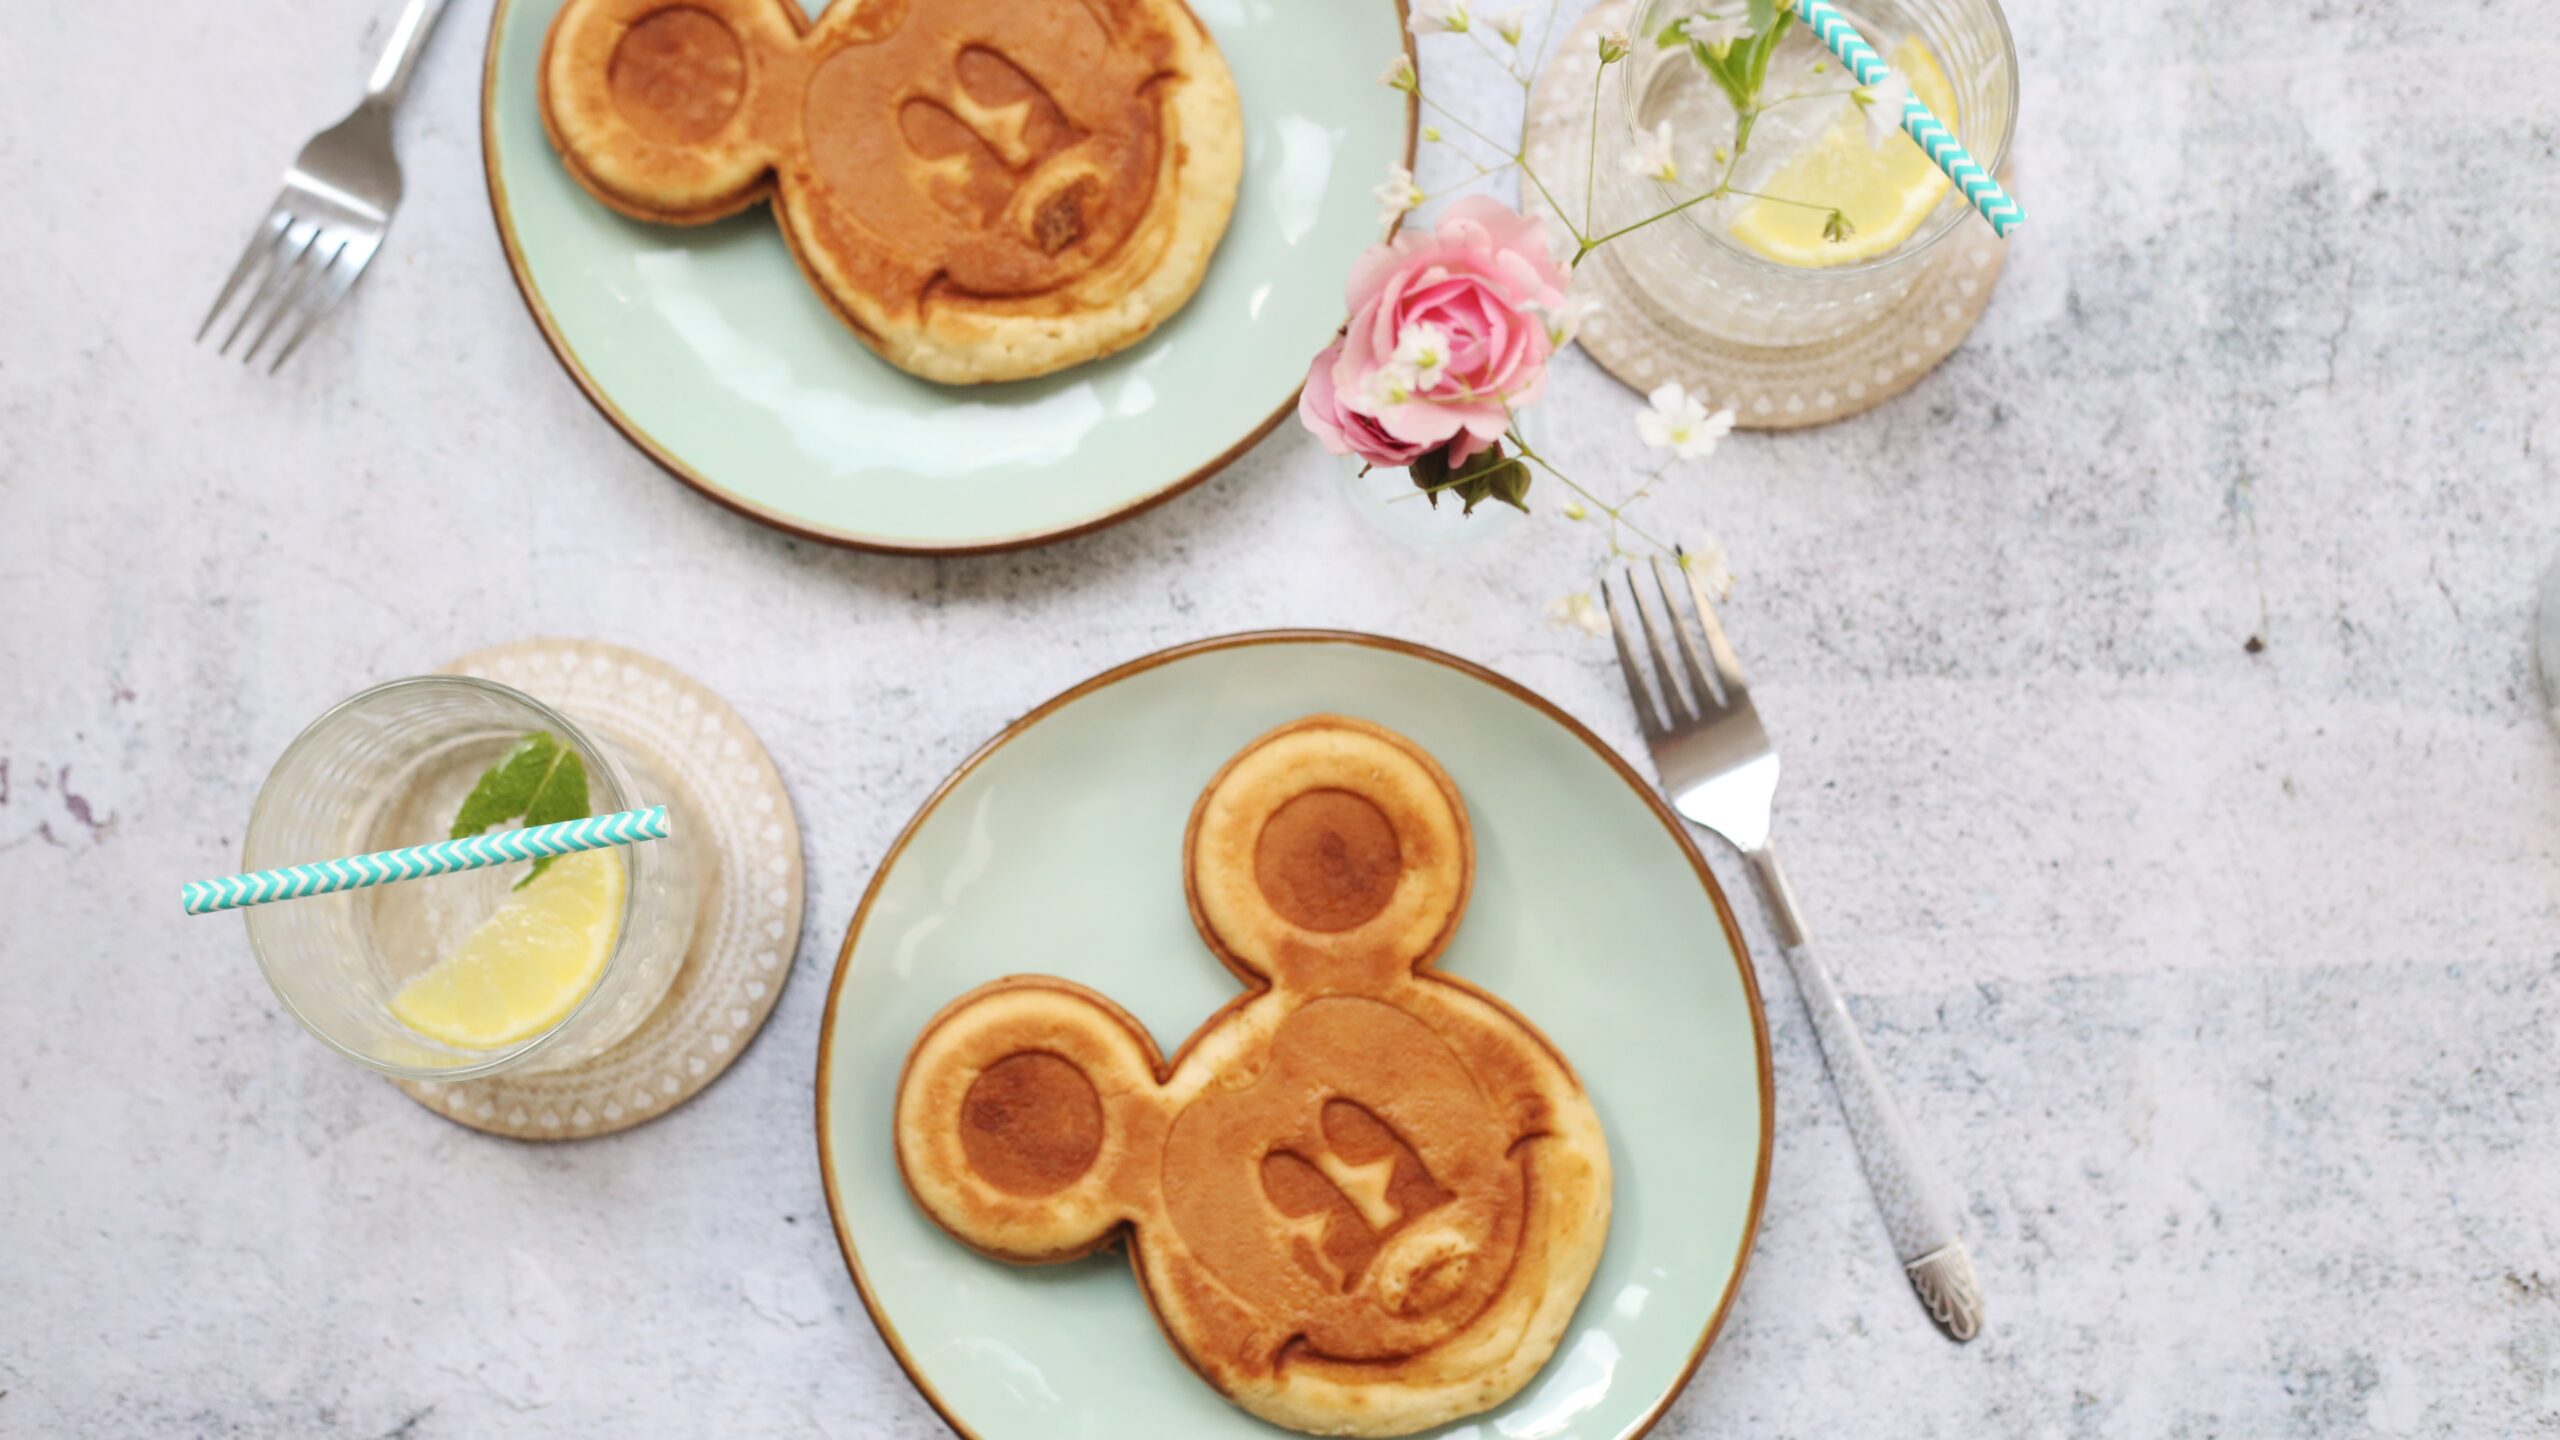 Pop culture, movie, character, music, and TV show themes are fun potluck themes for your guests. Pictured: Mickey waffles.